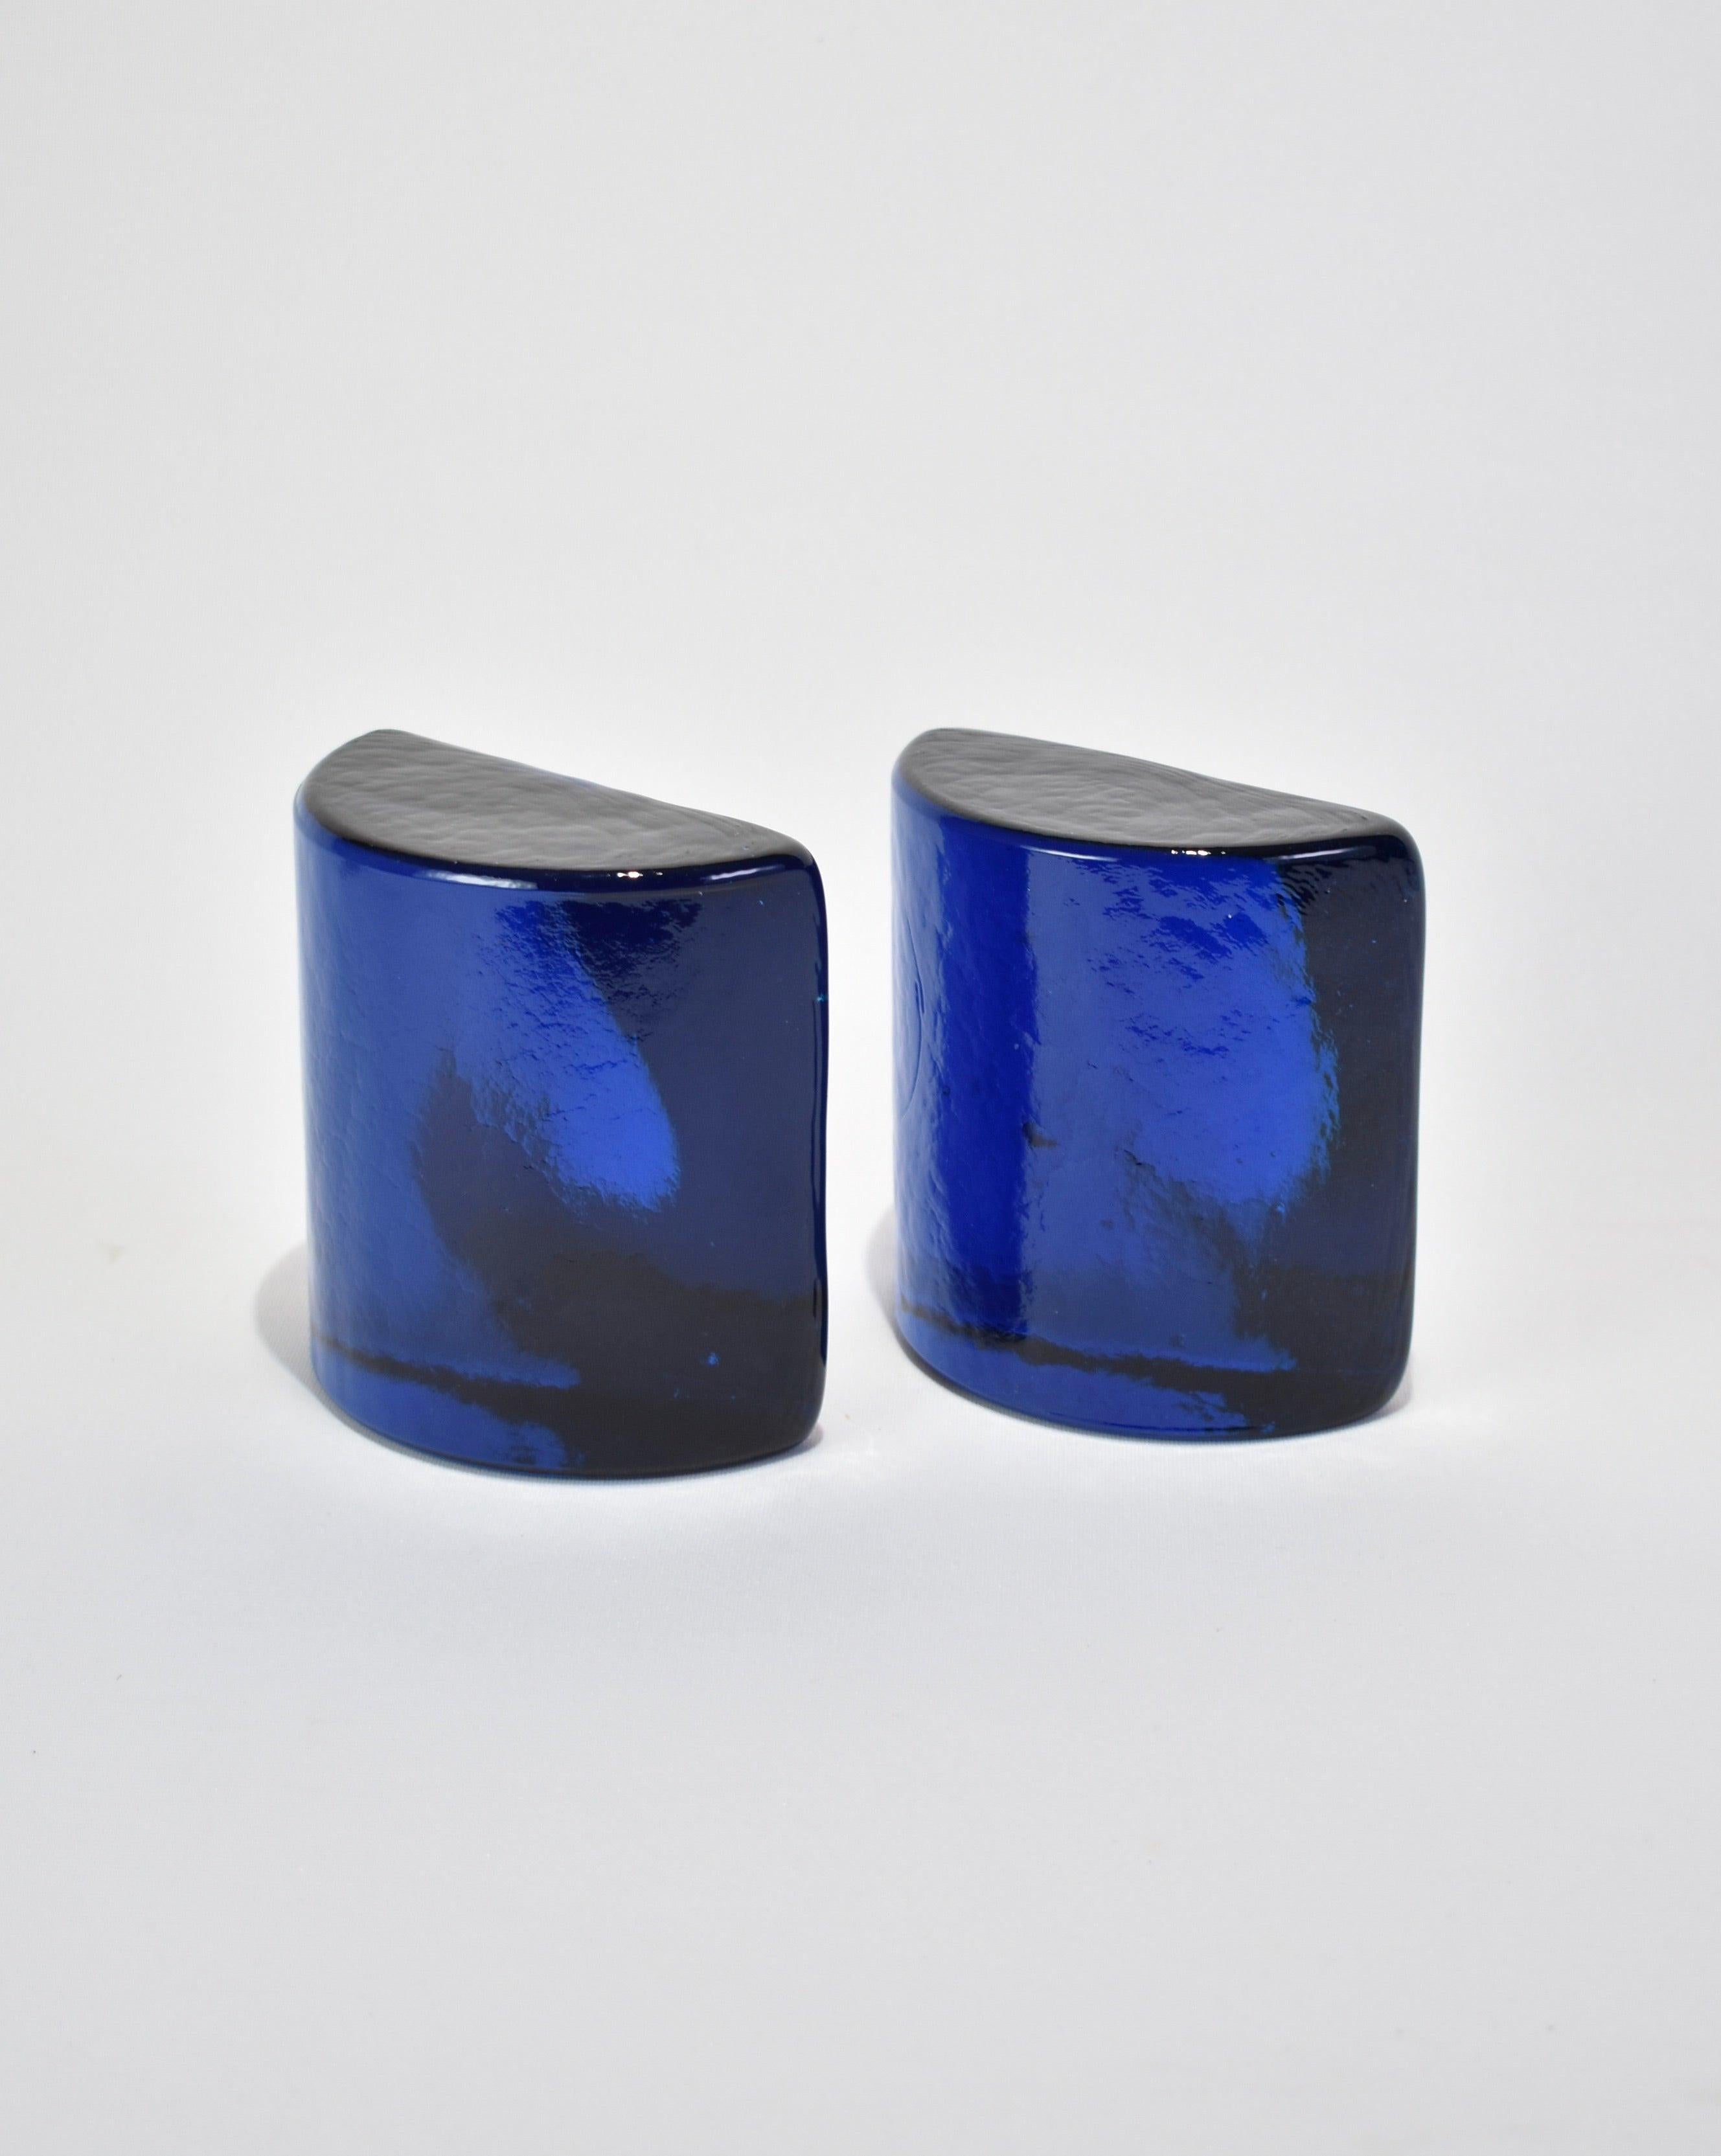 Vintage glass half-moon bookends in beautiful cobalt blue color. Set of two by Blenko Glass Company.